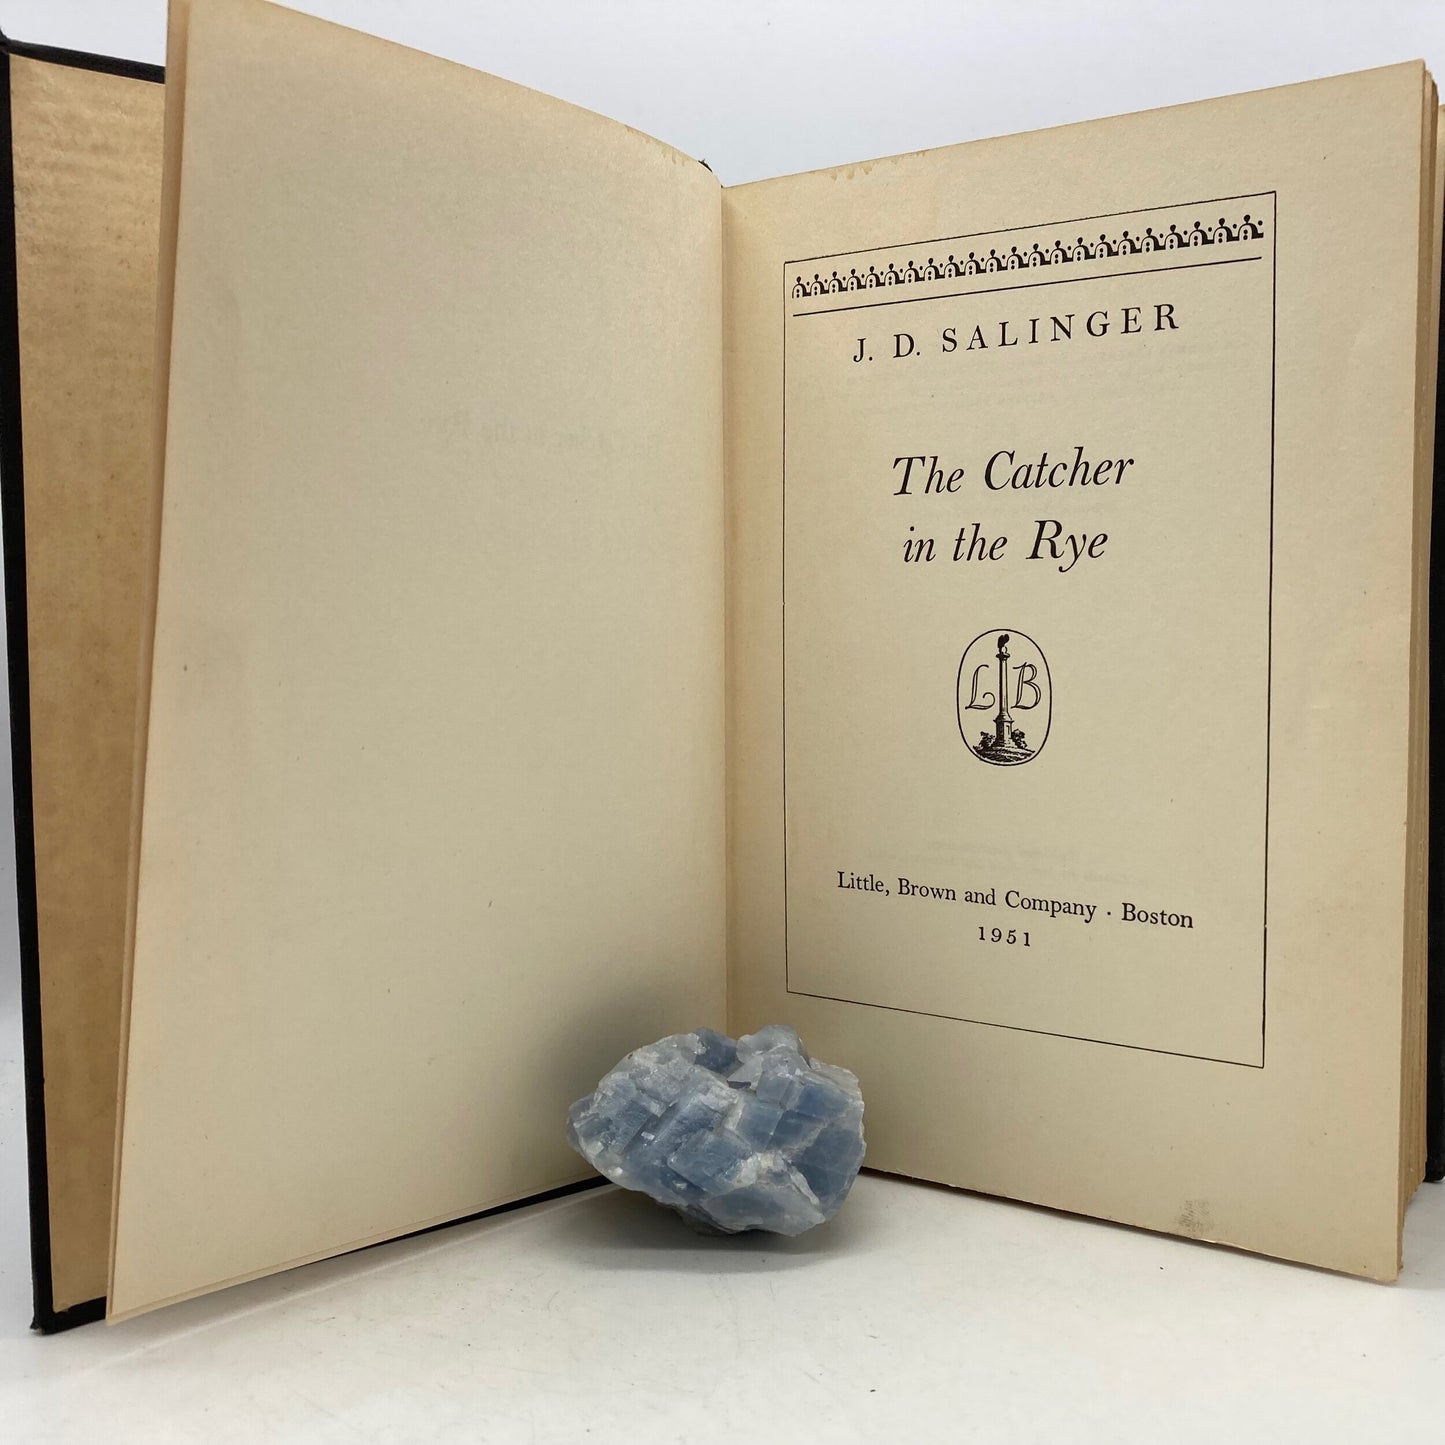 SALINGER, J.D. "The Catcher in the Rye" [Little, Brown & Co, 1951] 1st Edition/11th Printing - Buzz Bookstore